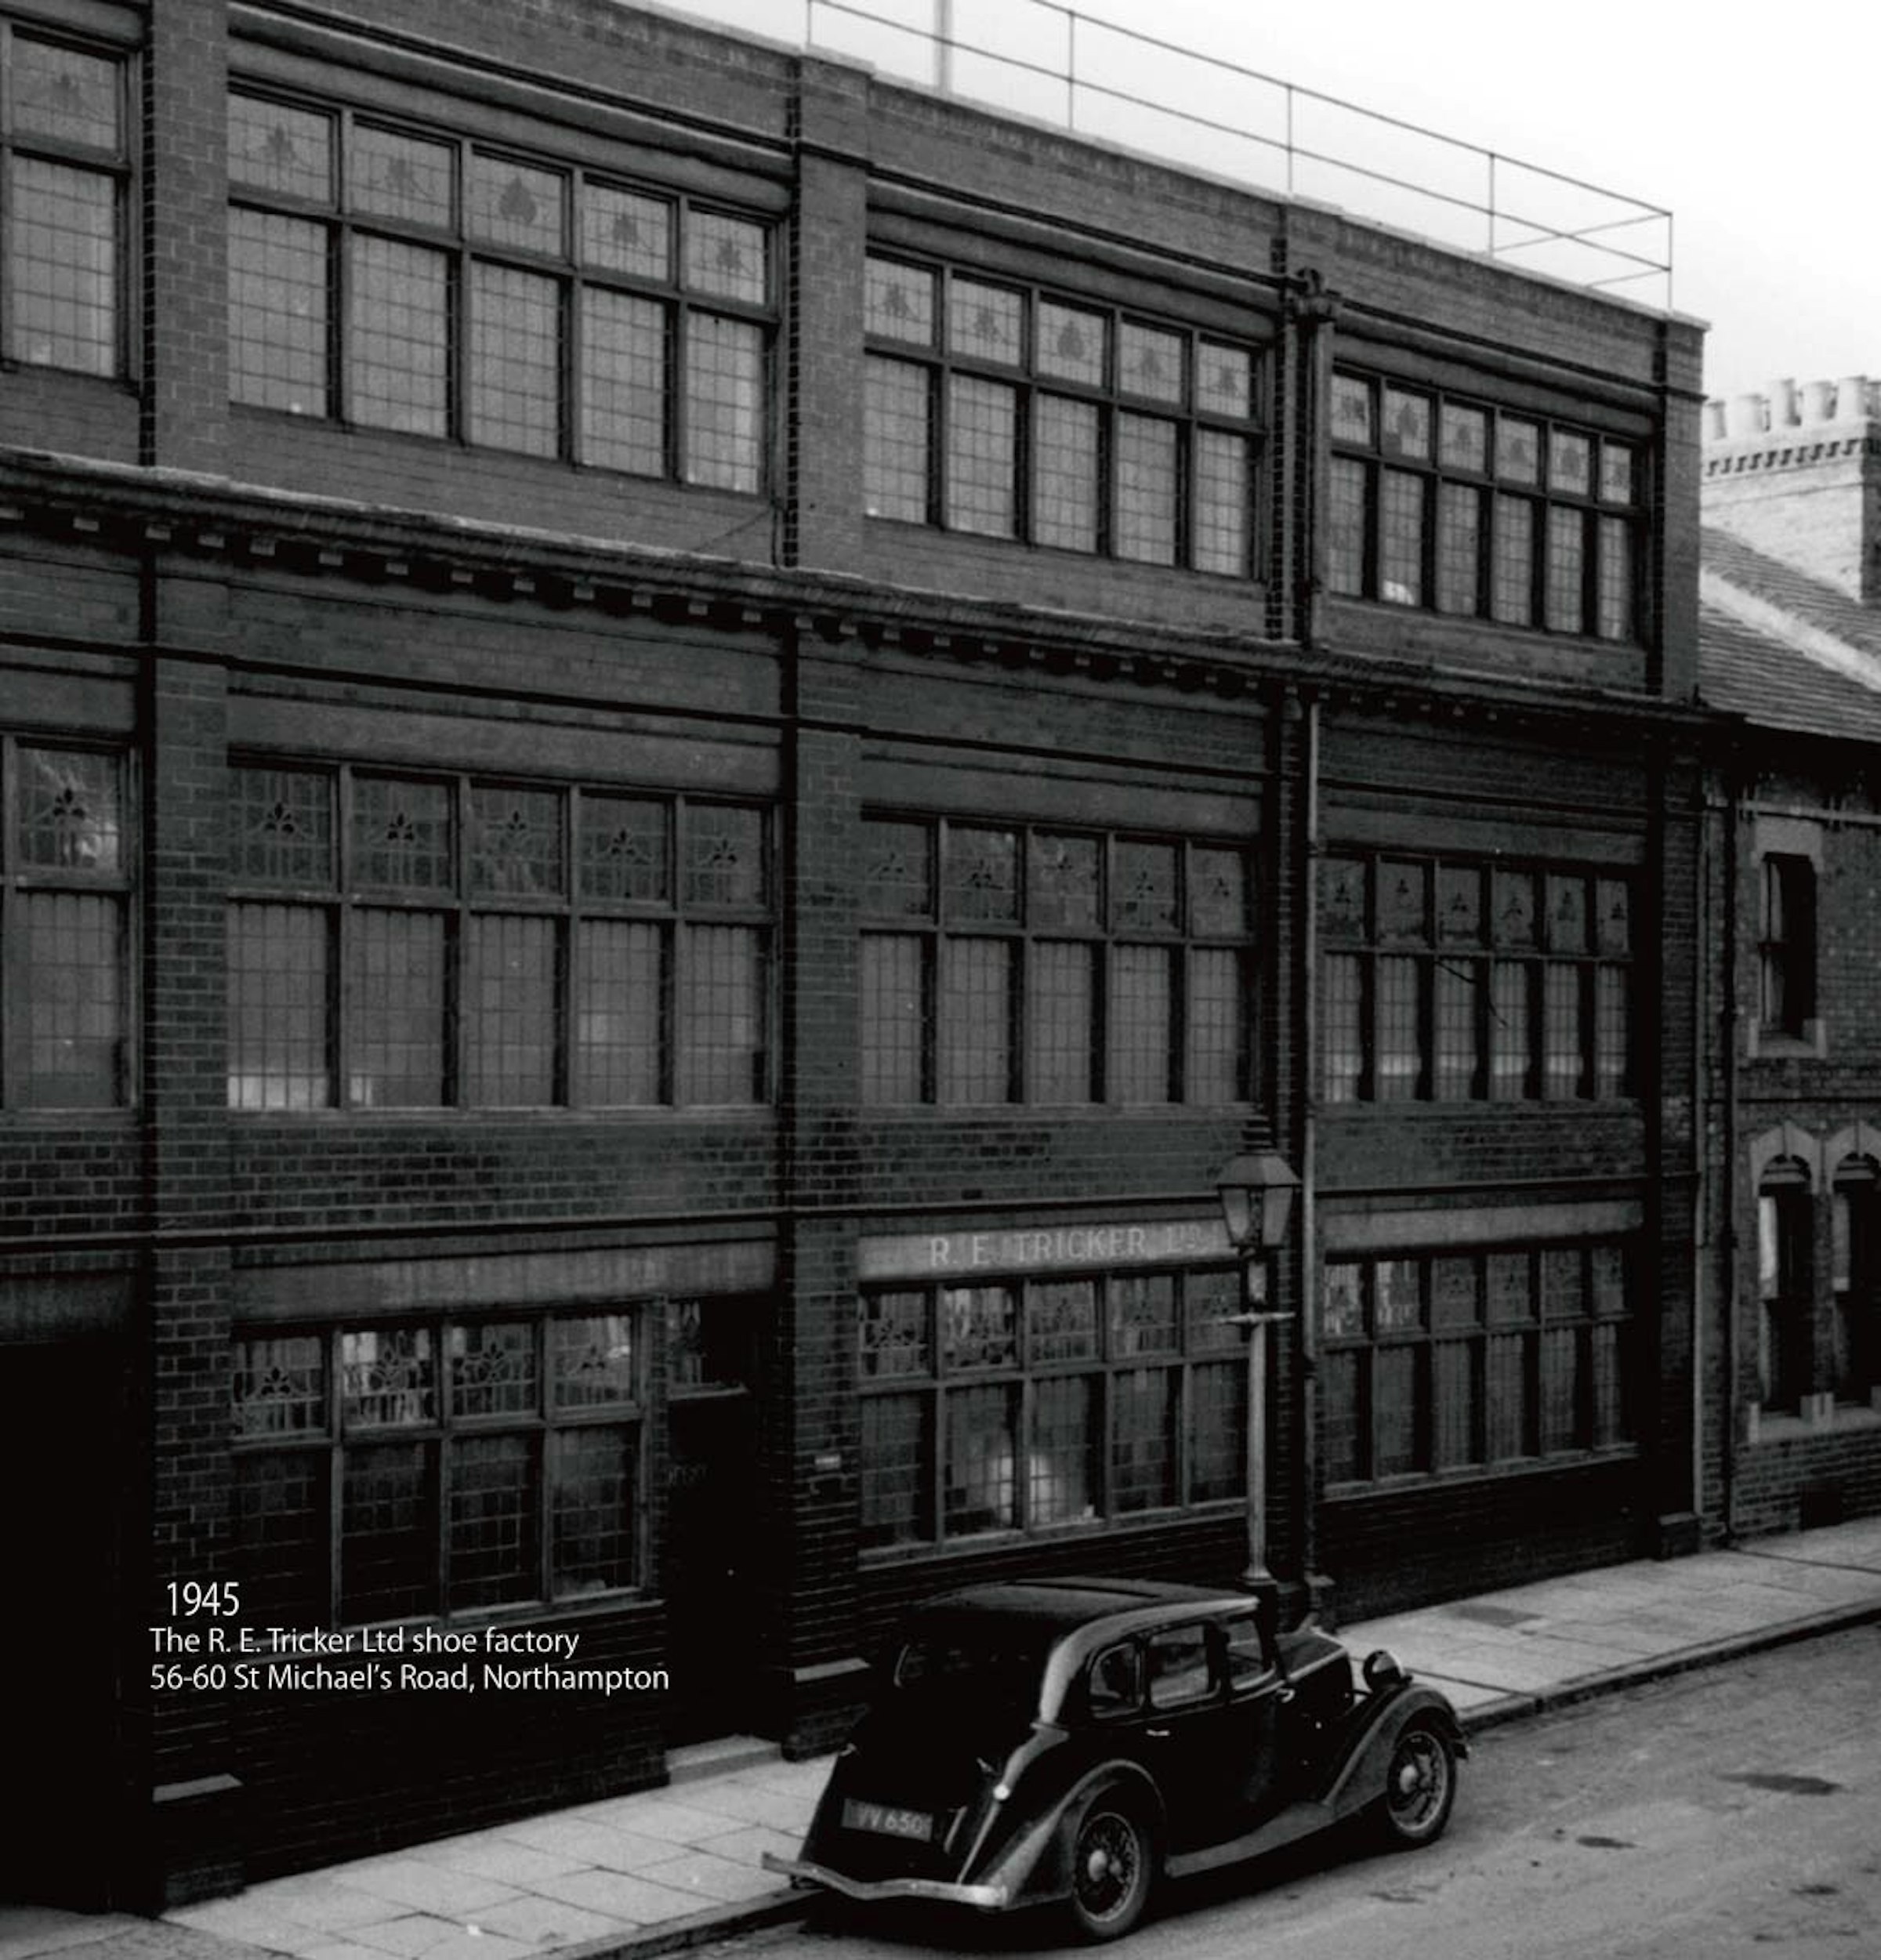 Image of Tricker's headquarters believed to be from 1945